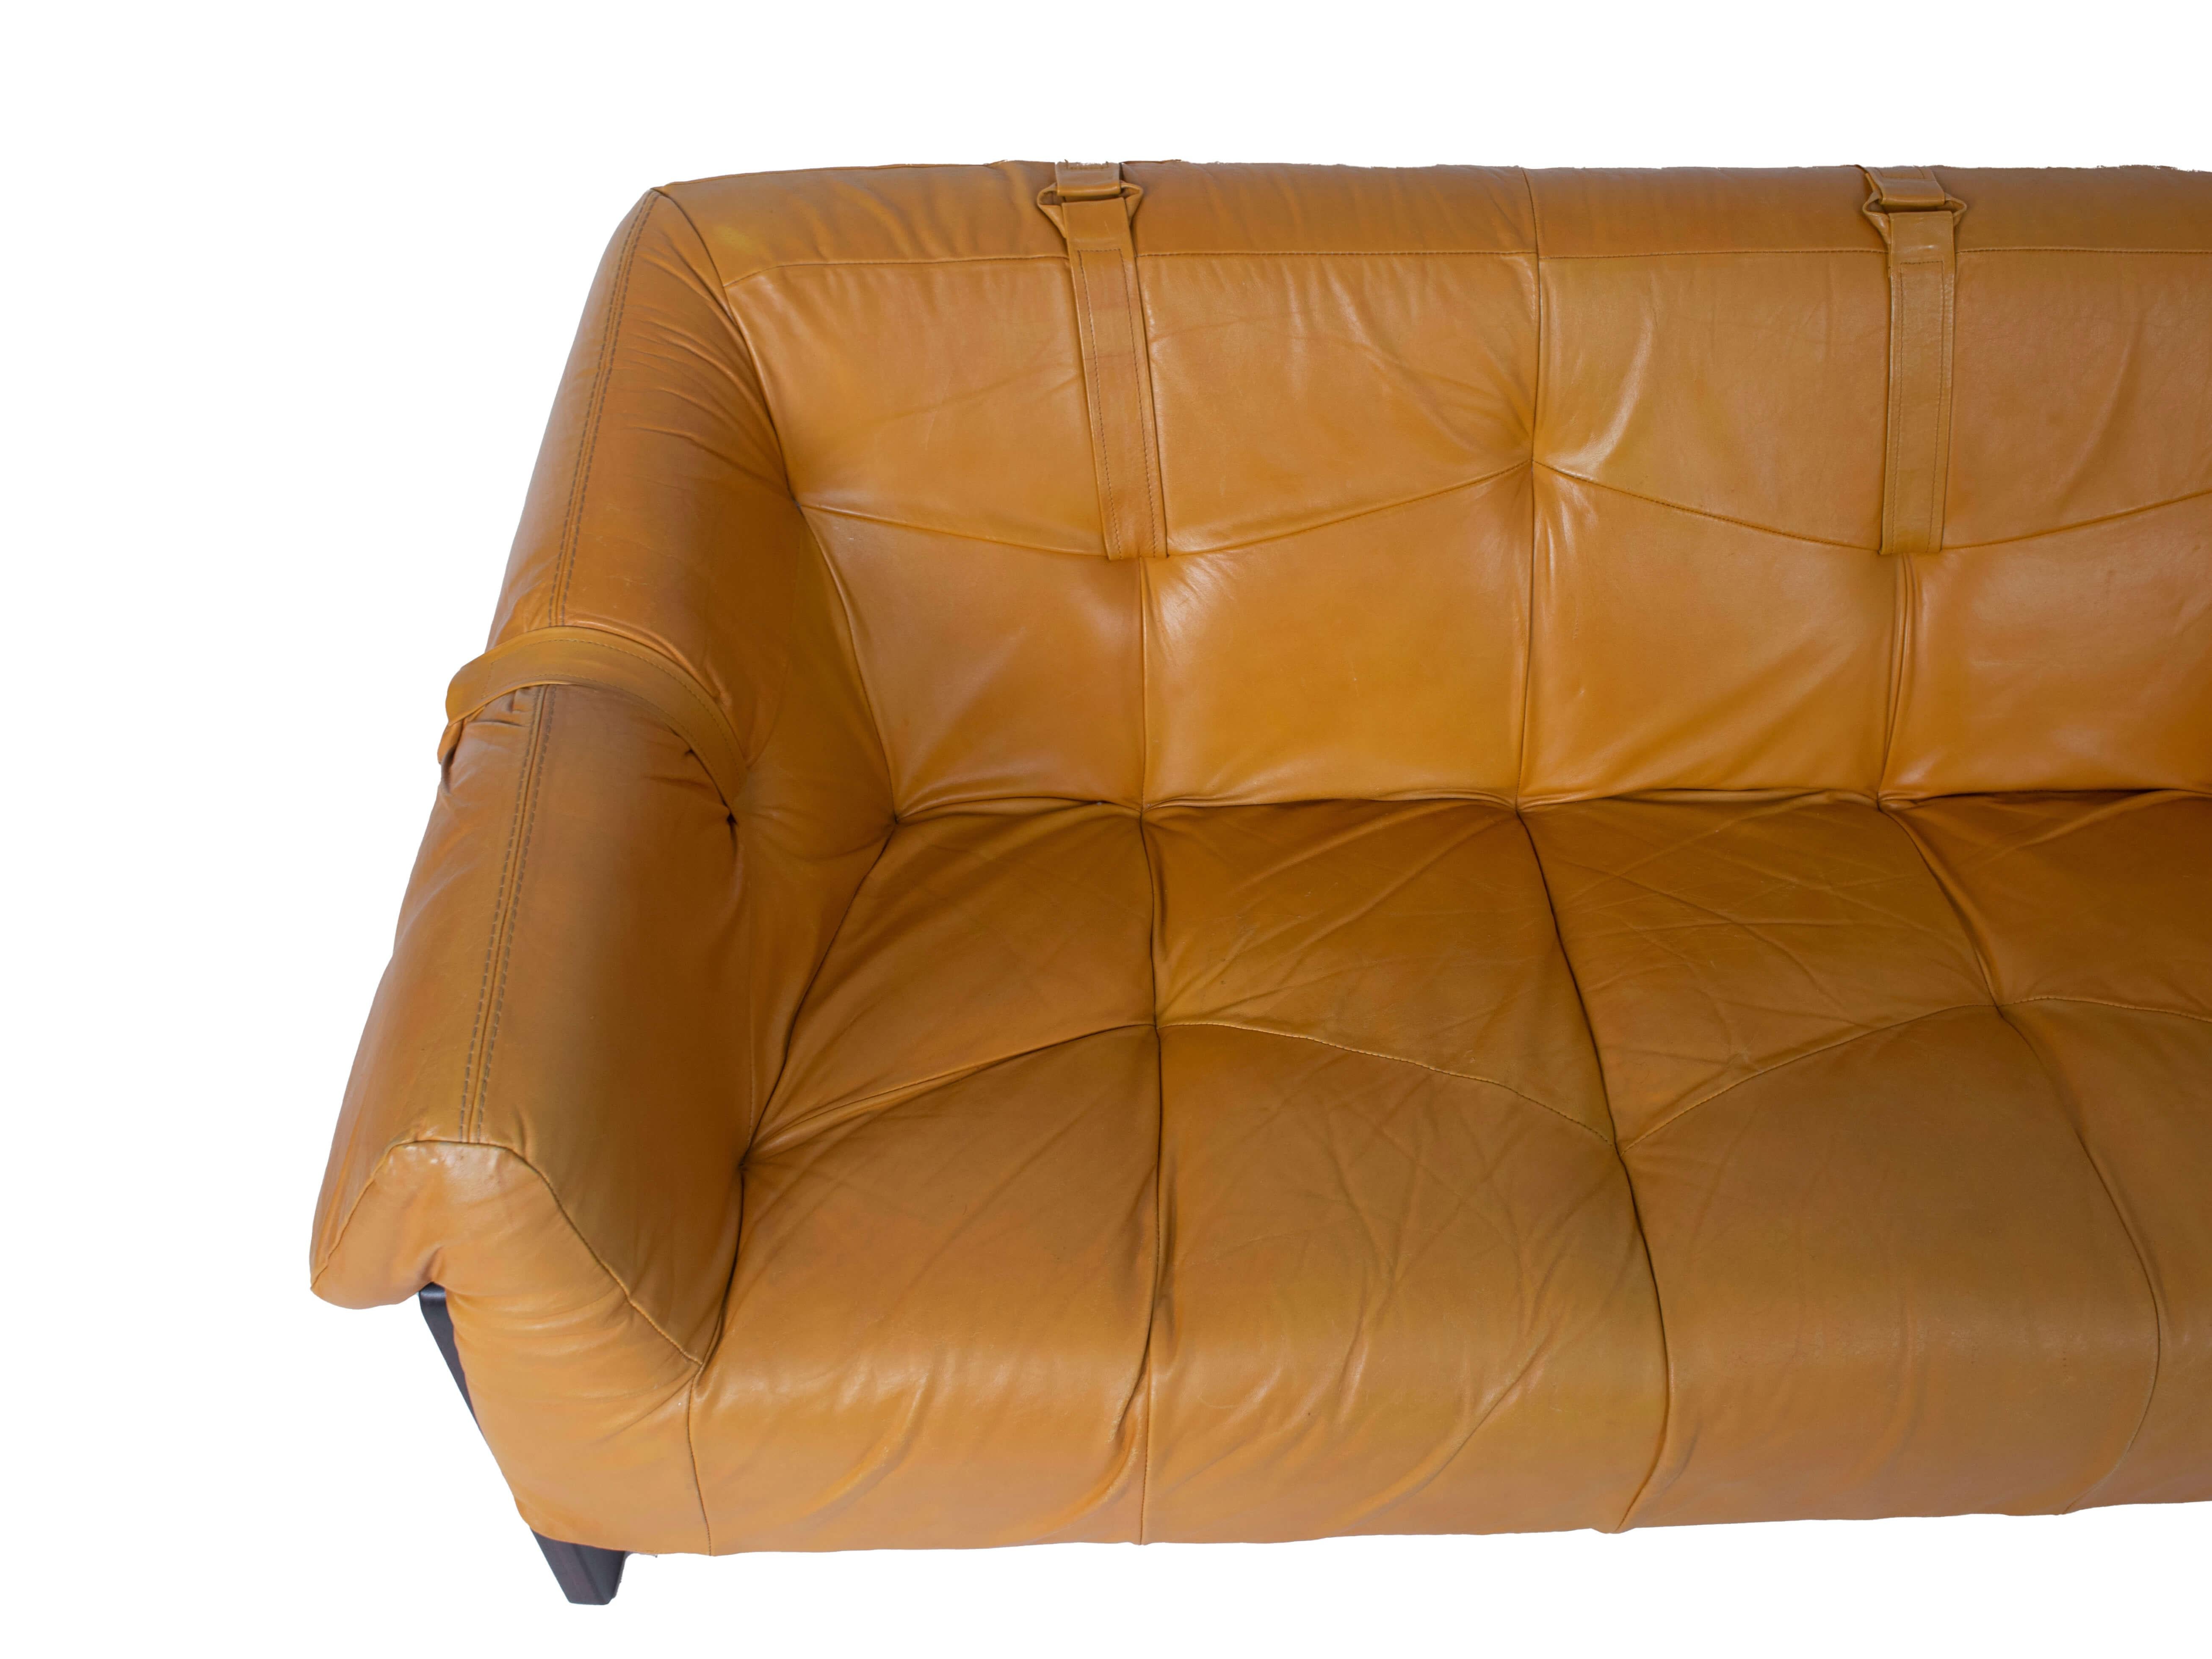 Mid-20th Century Percival Lafer Sofa MP-091 in Leather and Hardwood, Brazil, 1960s